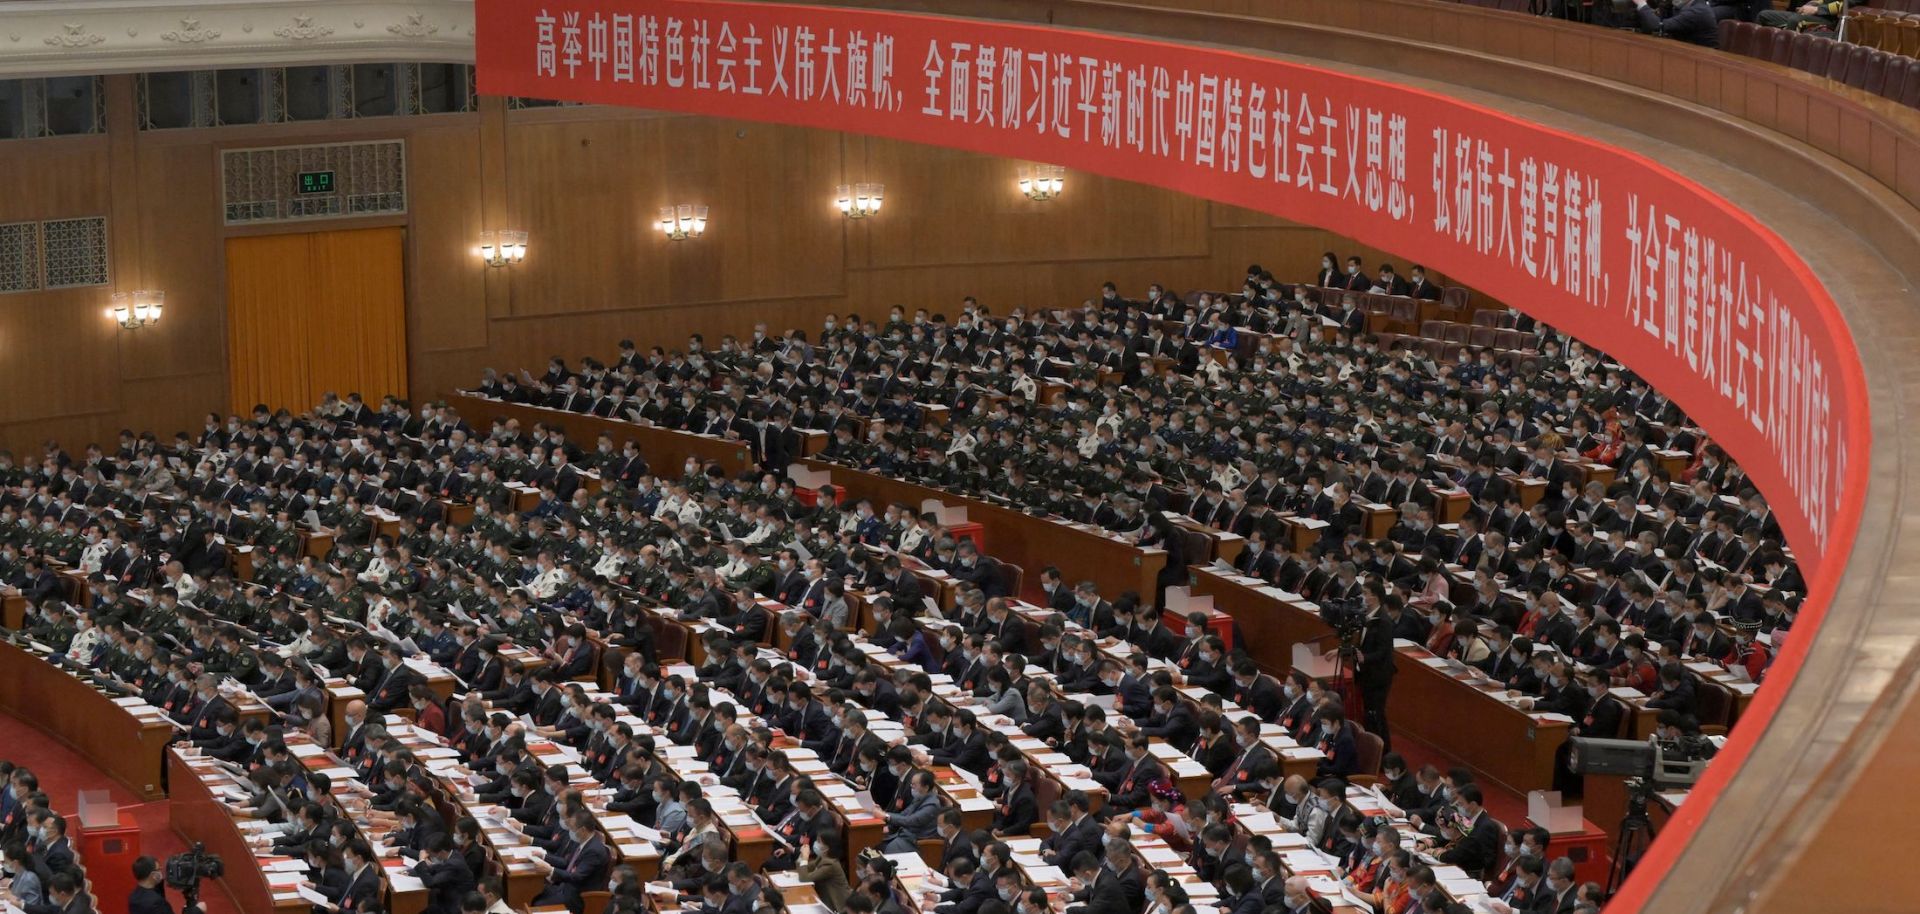 Delegates attend the closing ceremony of the Chinese Communist Party's 20th Congress at the Great Hall of the People in Beijing, China, on Oct. 22, 2022.